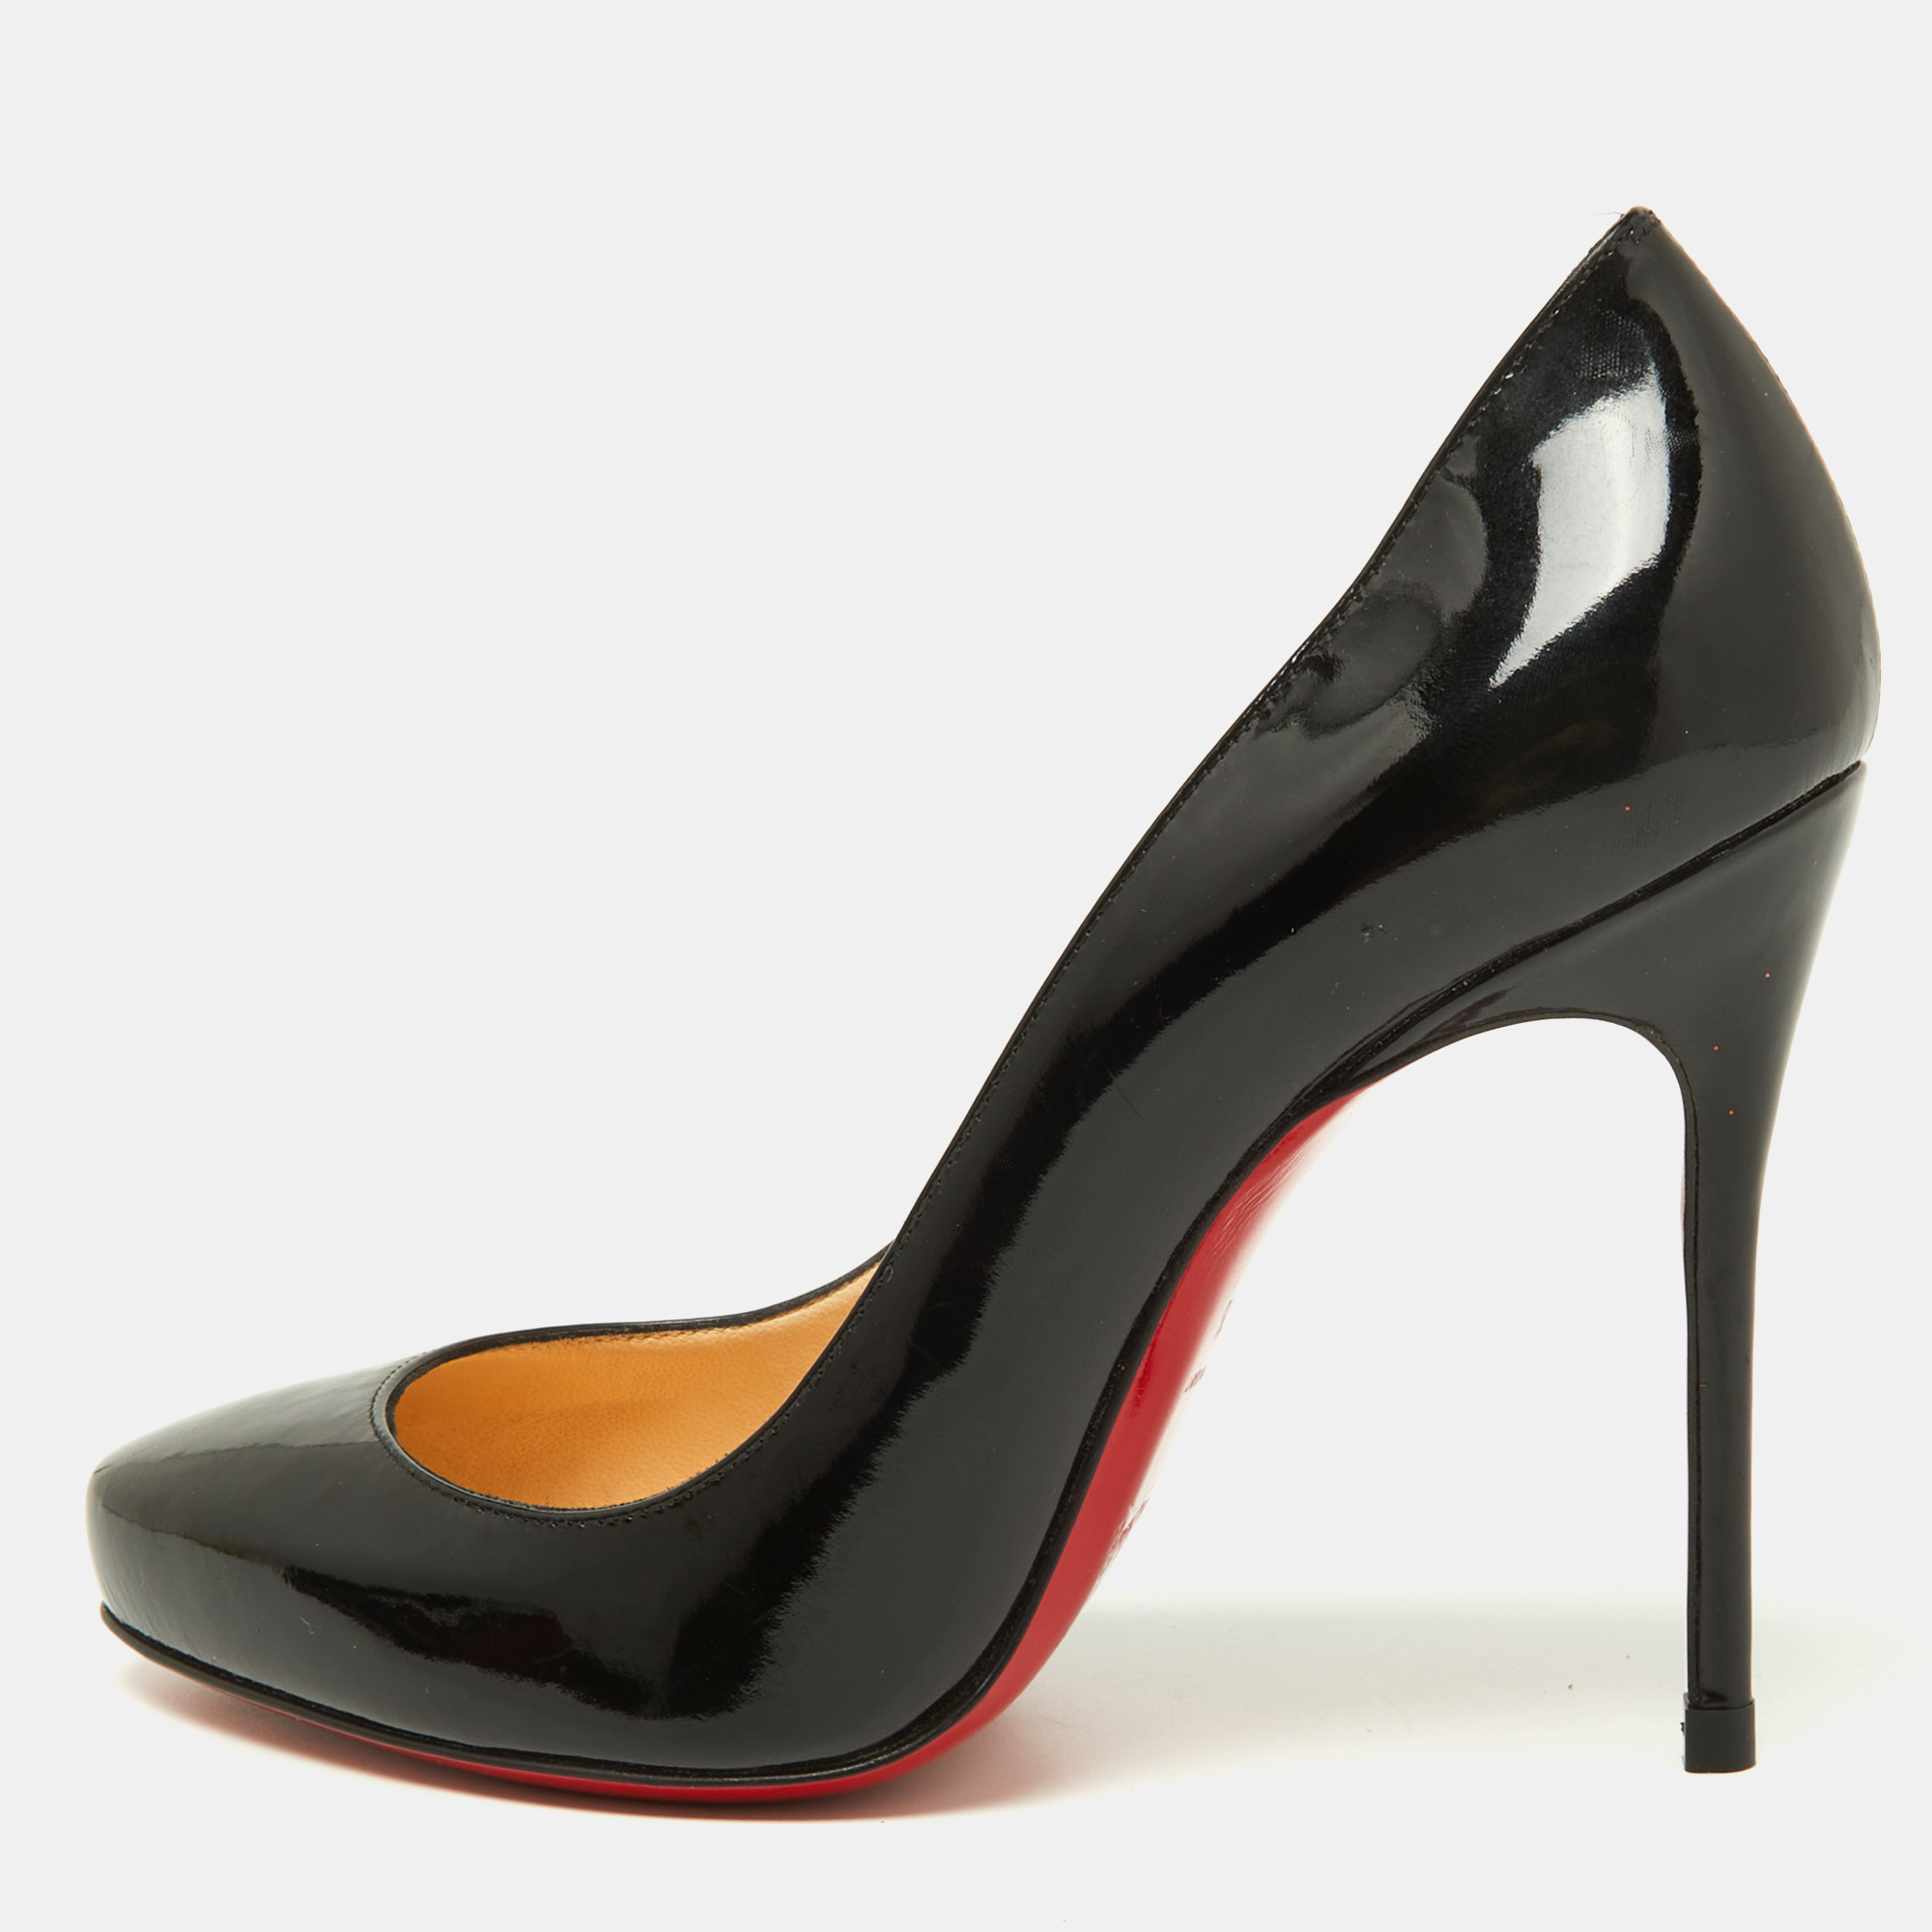 Pre-owned Christian Louboutin Black Patent Leather Elisa Pumps Size 36.5